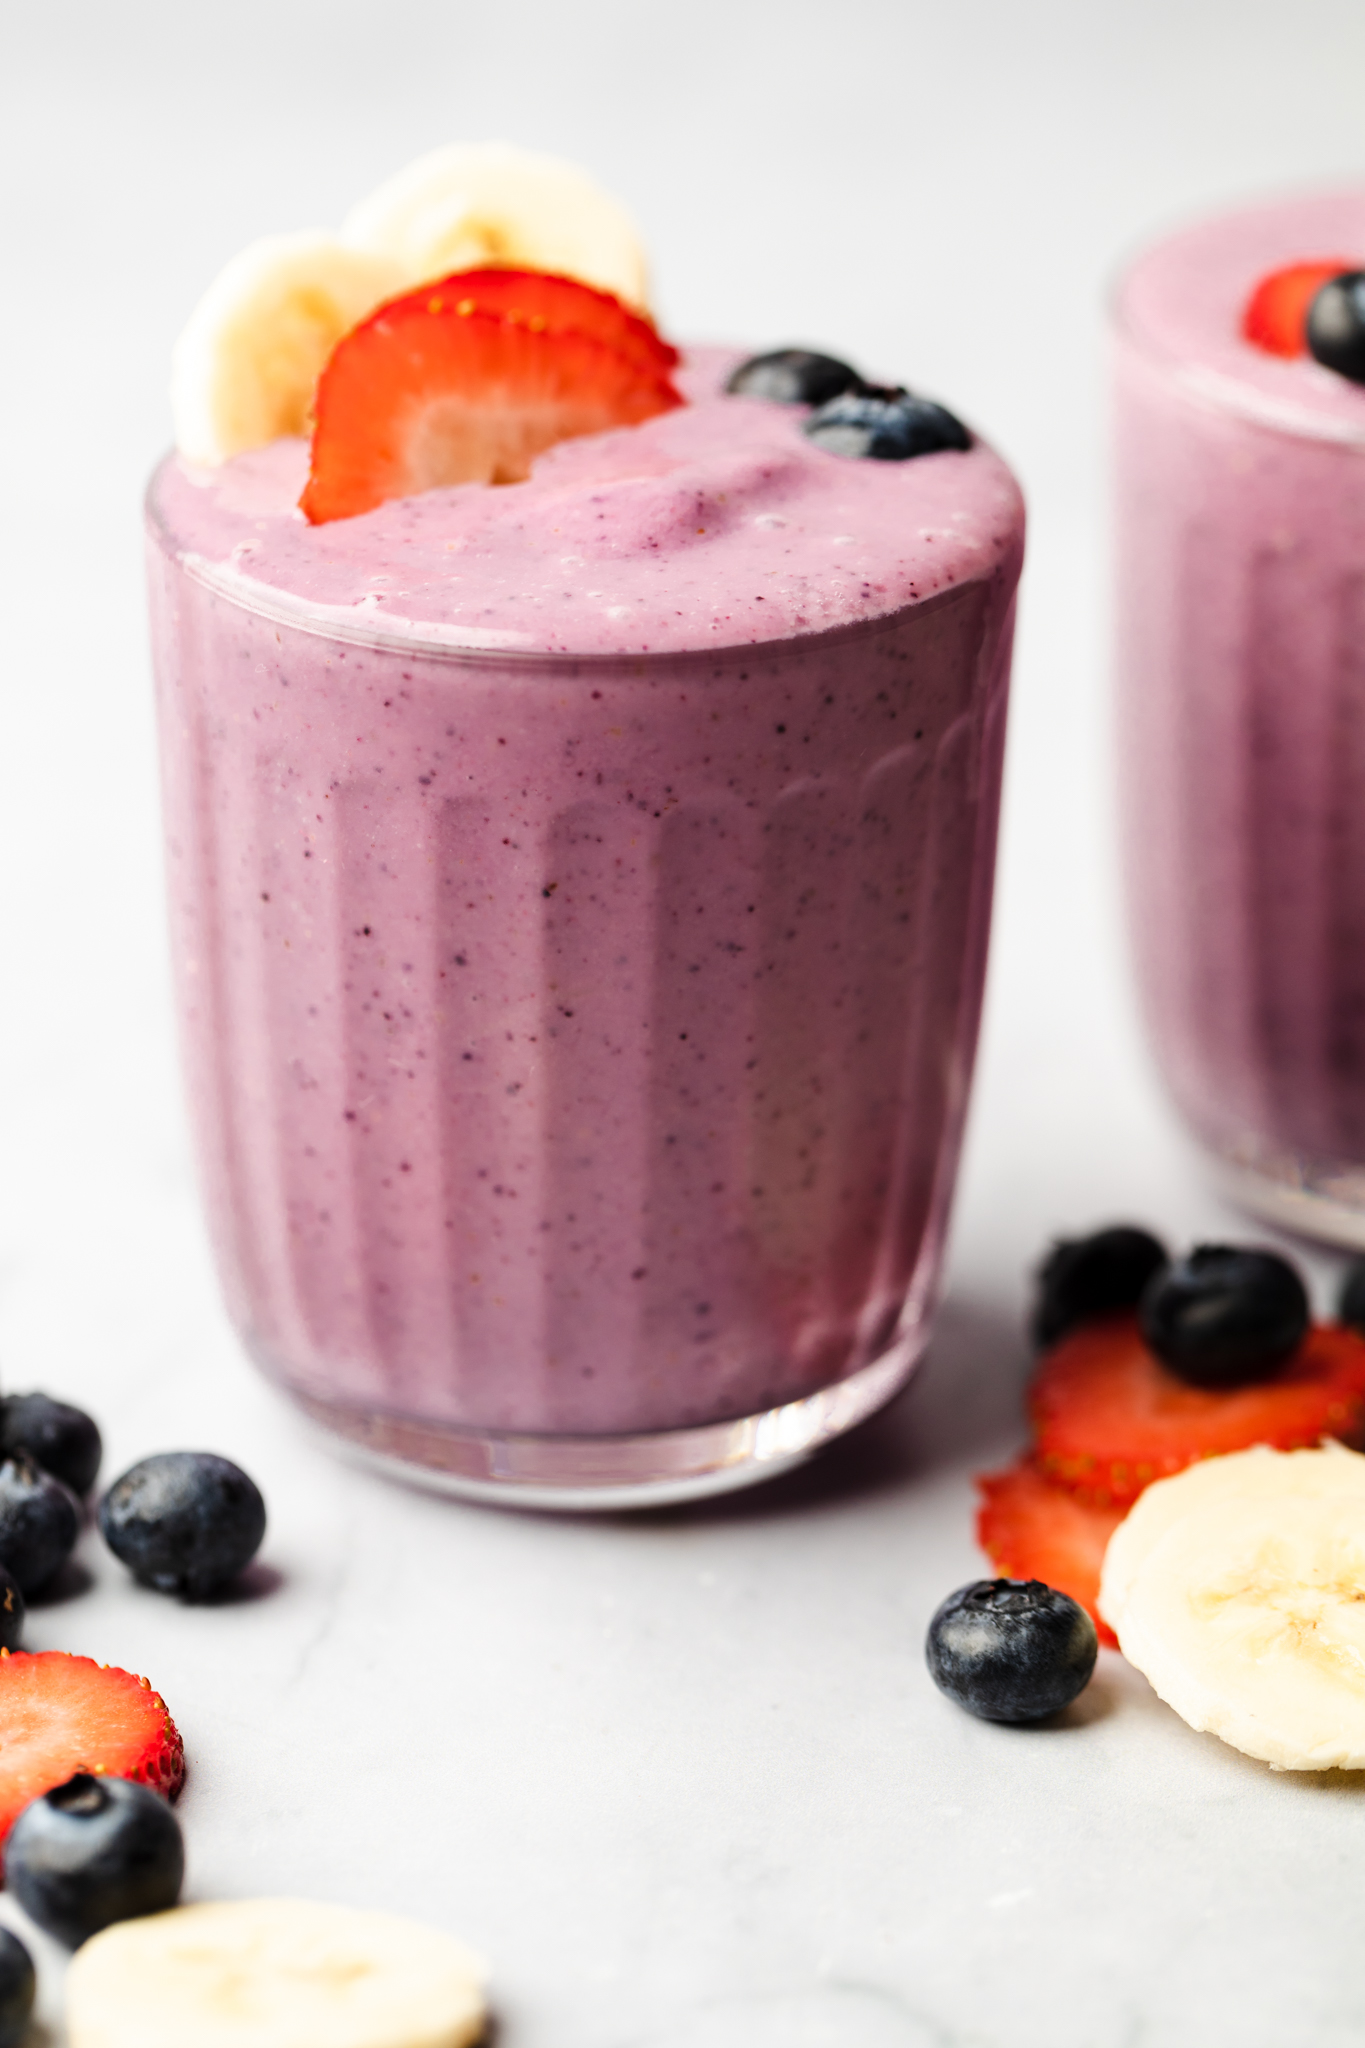 https://themindfulhapa.com/wp-content/uploads/2021/02/strawberry-blueberry-smoothie-8.jpg